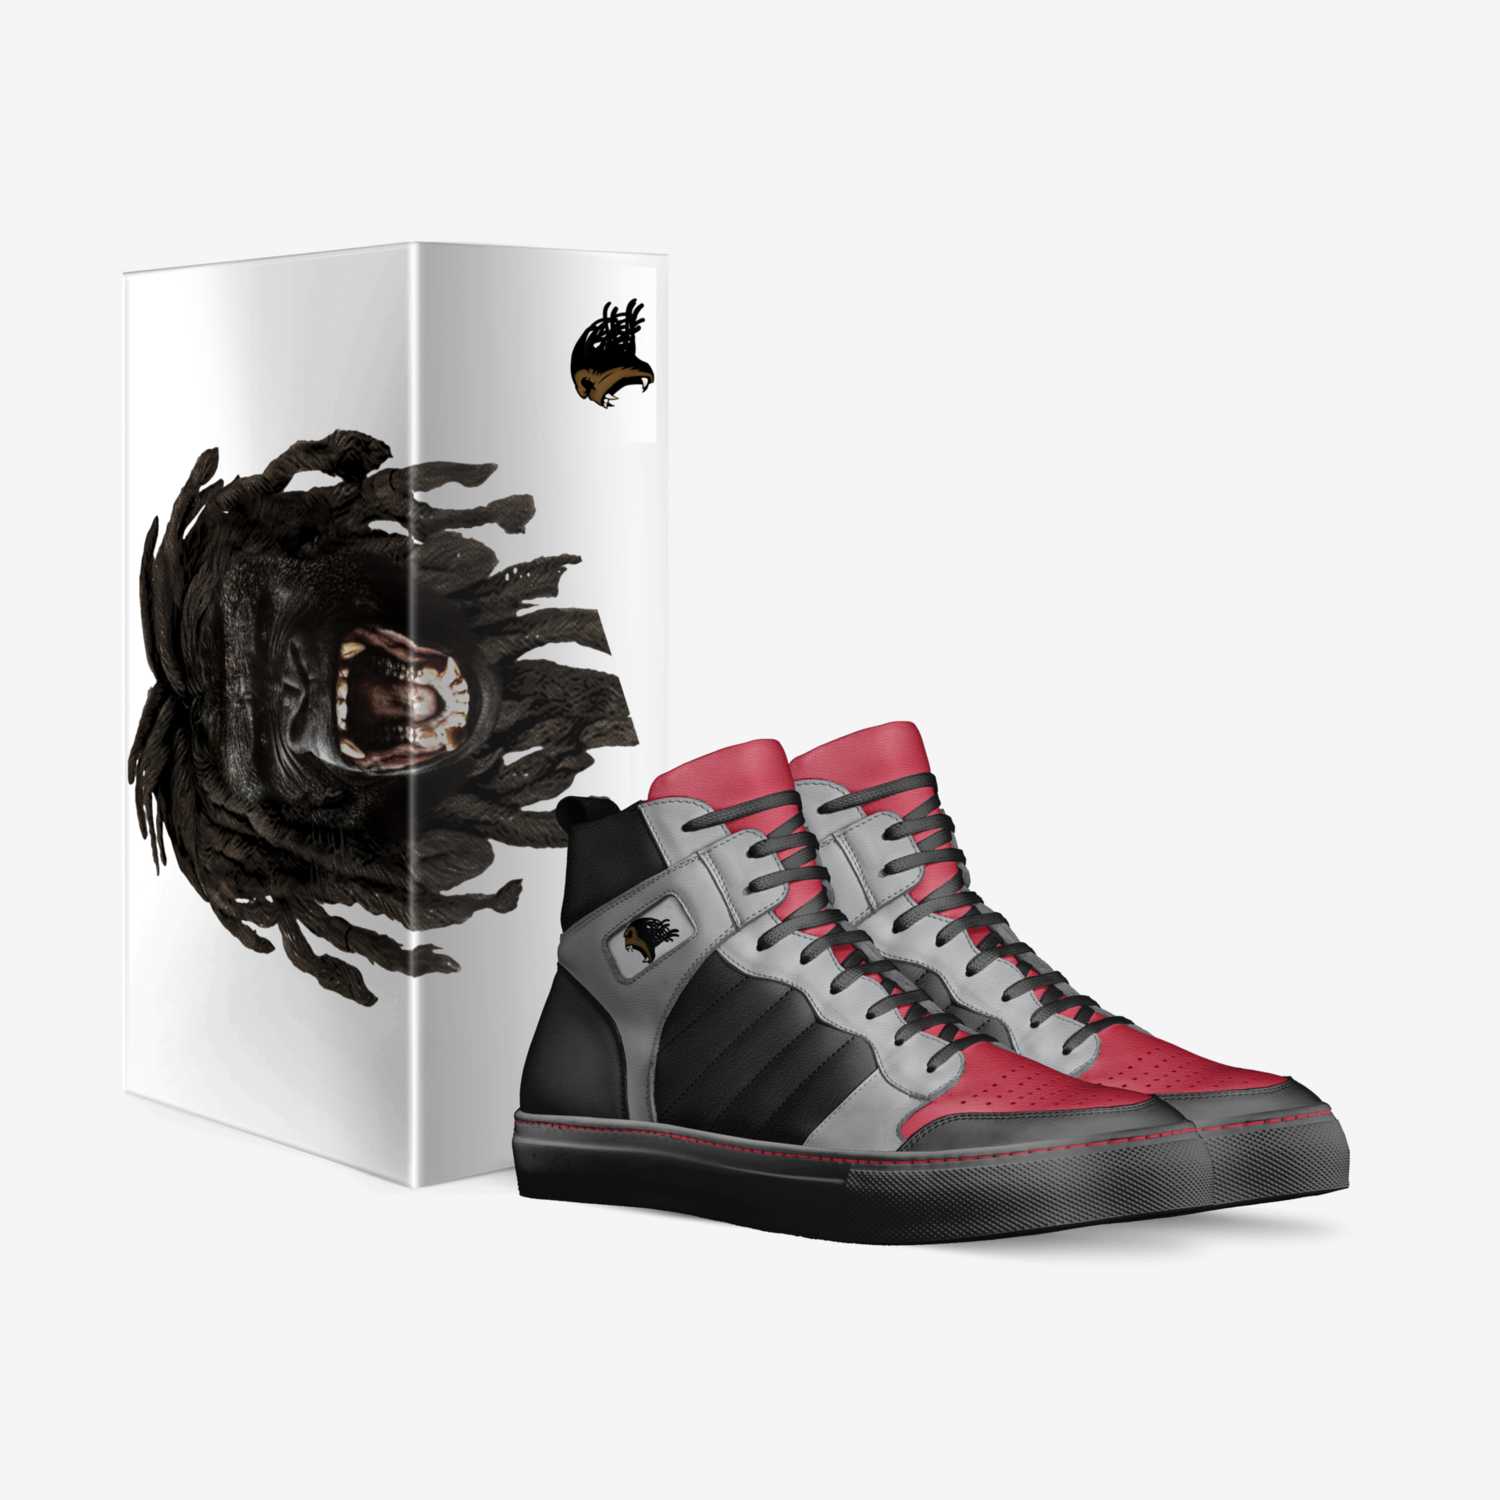 Alpha 1 custom made in Italy shoes by Dion Barron | Box view